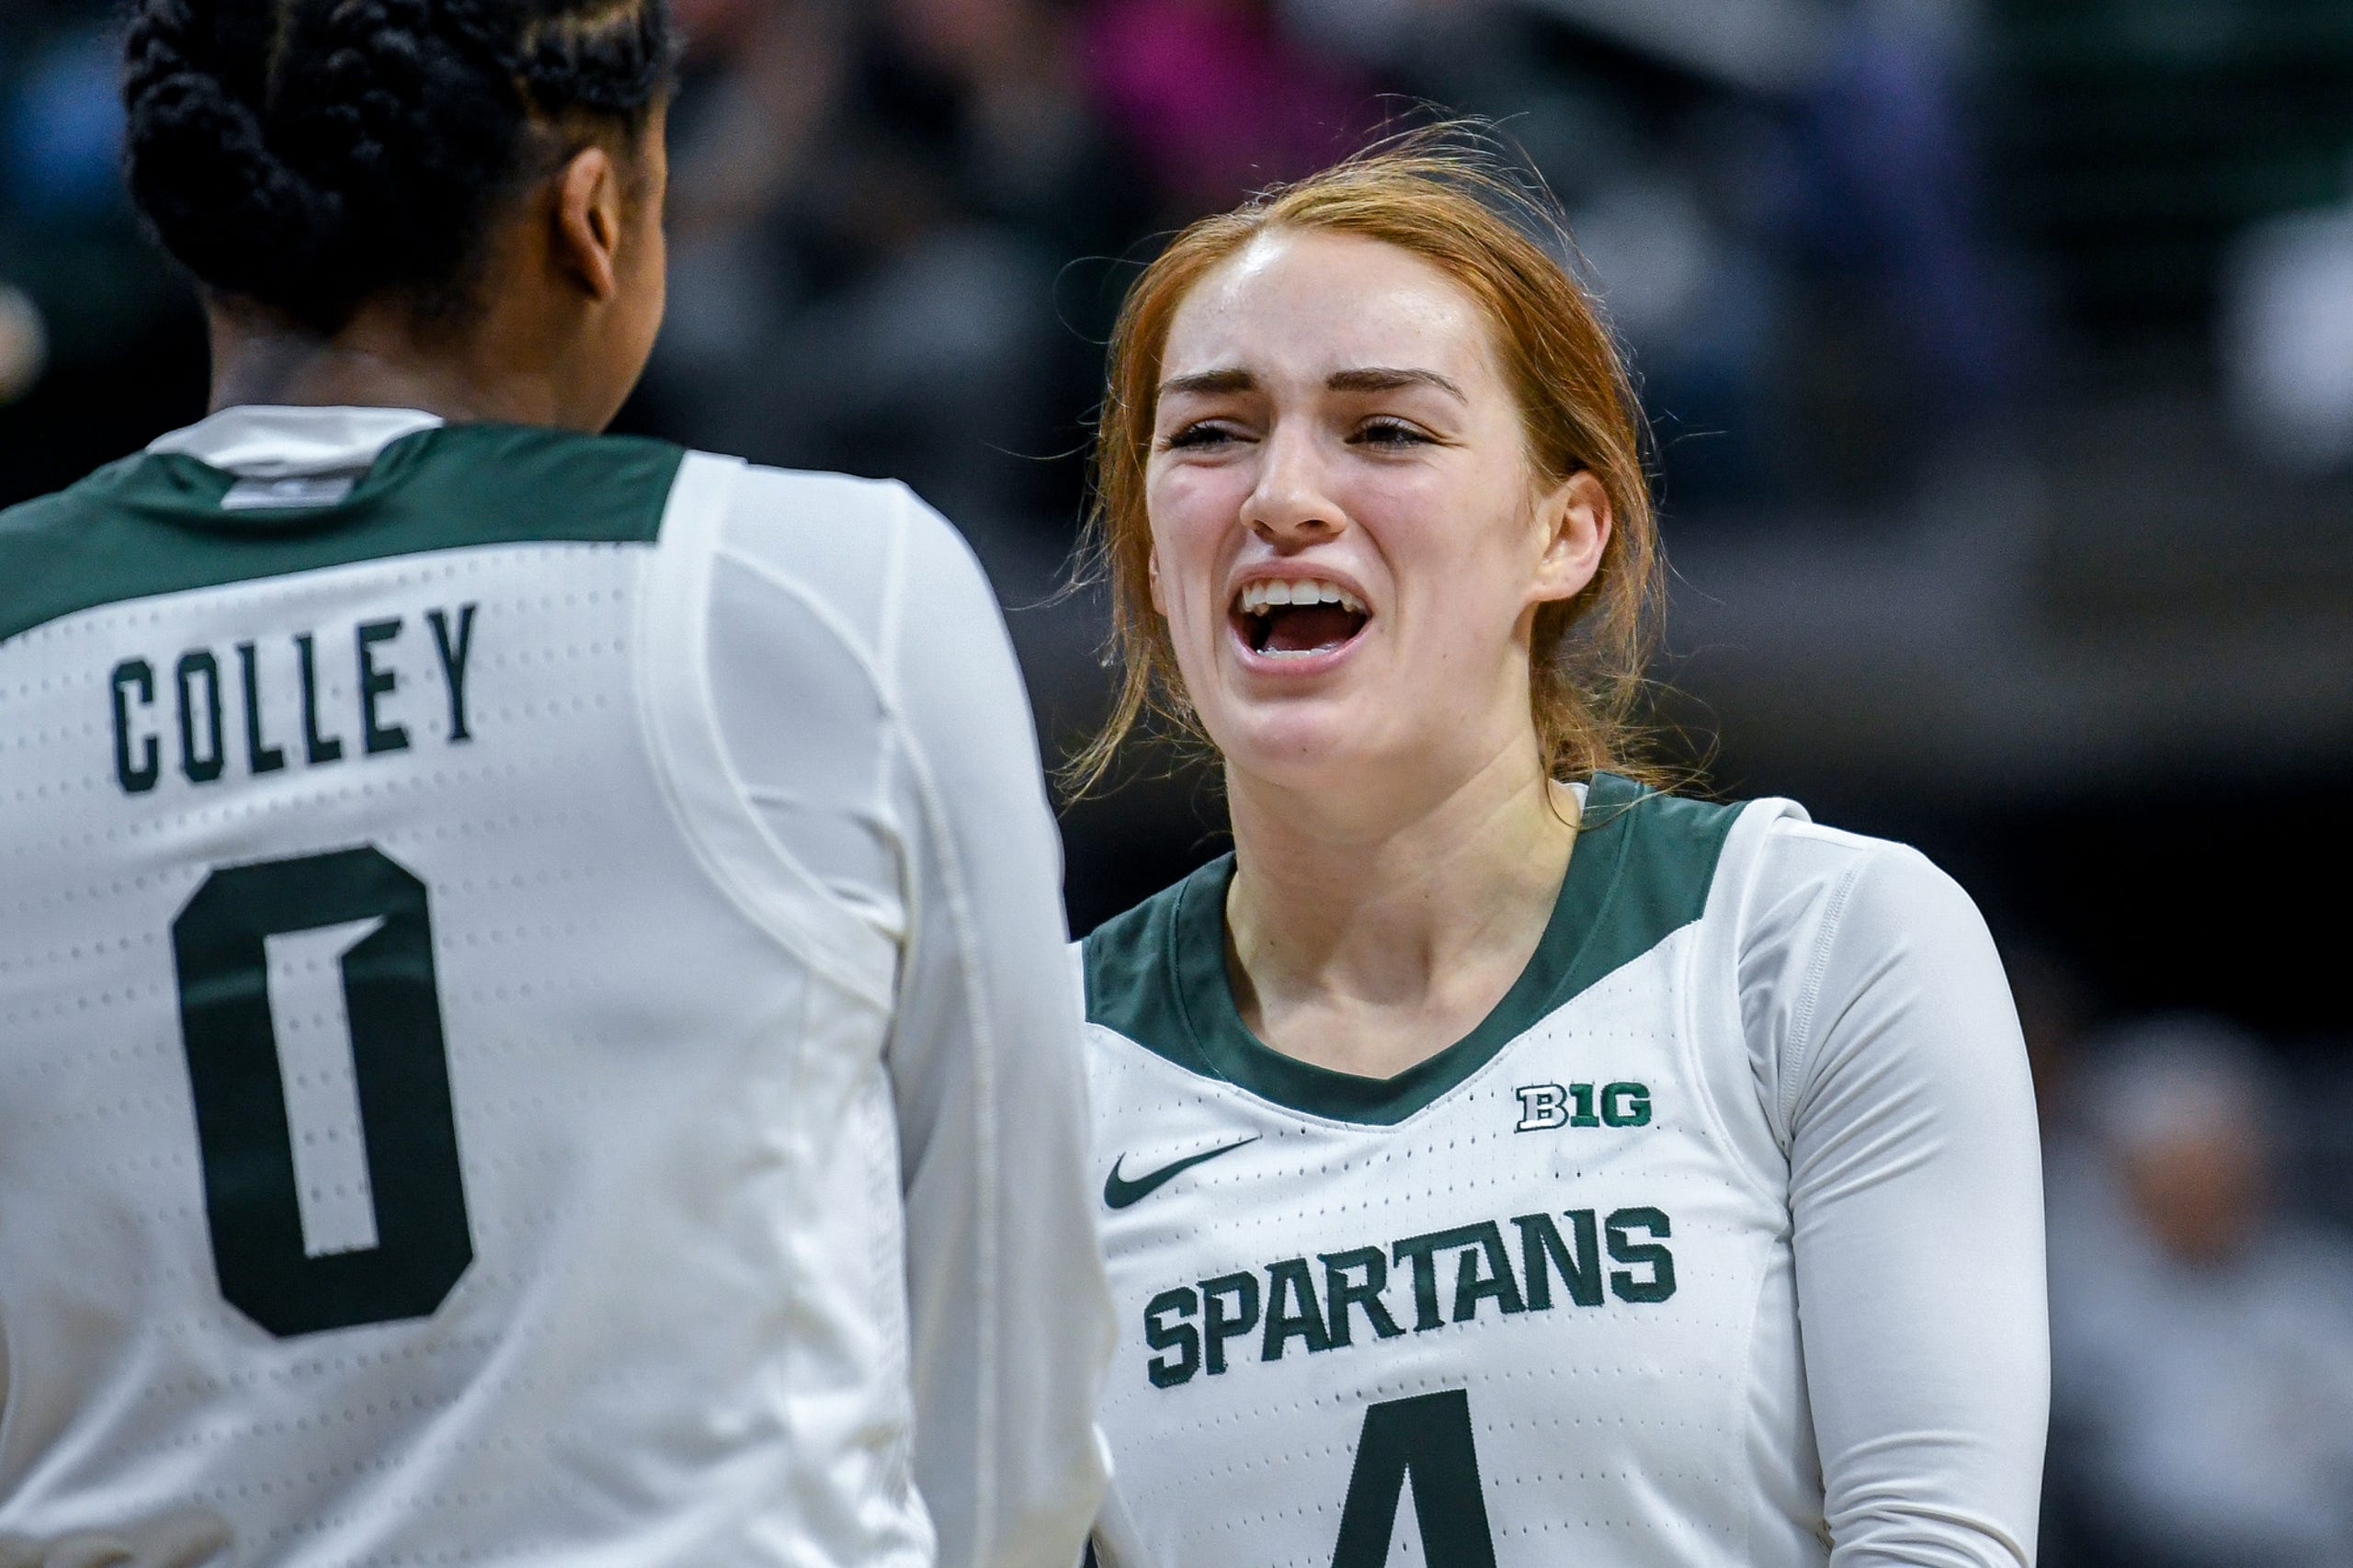 Michigan State's Taryn McCutcheon, right, celebrates with teammate Shay Colley after a play during the fourth quarter on Tuesday, Nov. 5, 2019, at the Breslin Center in East Lansing.